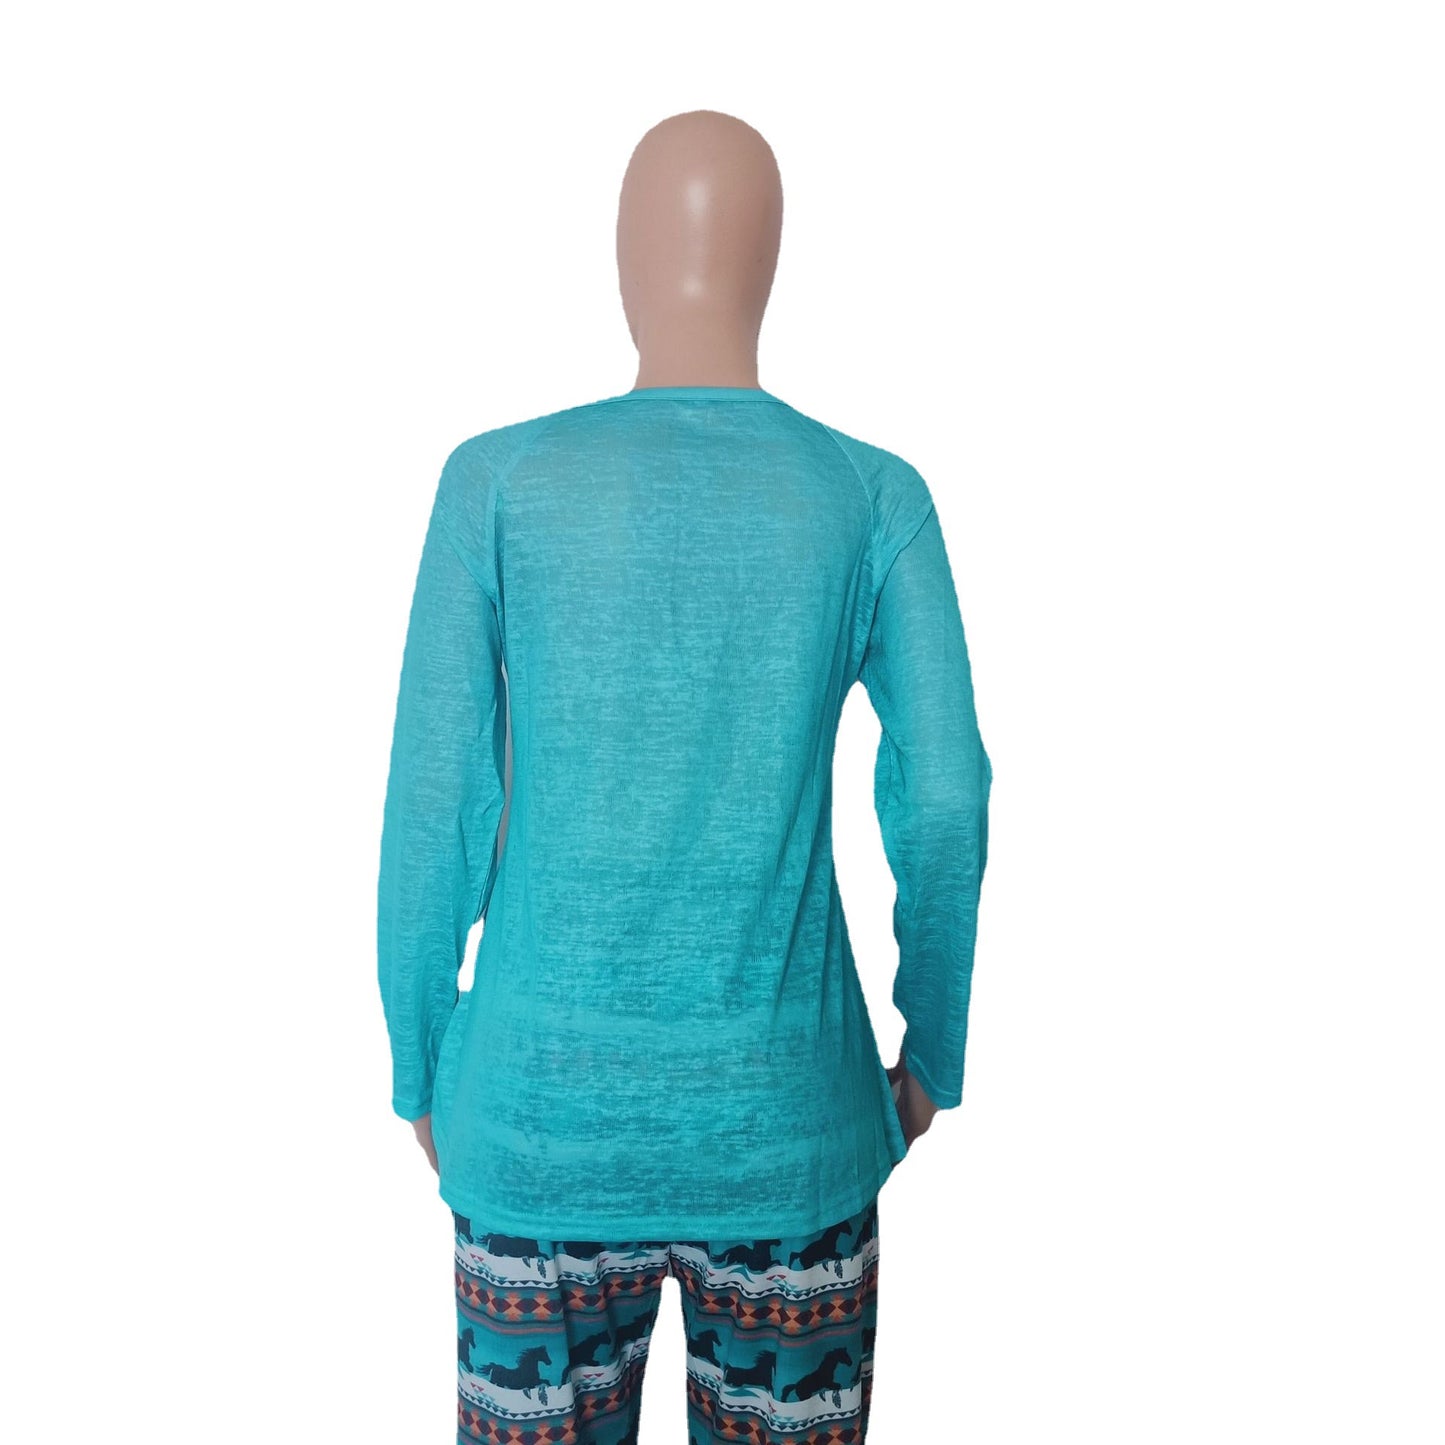 Casual Ethnic Long Sleeves T Shirts for Women